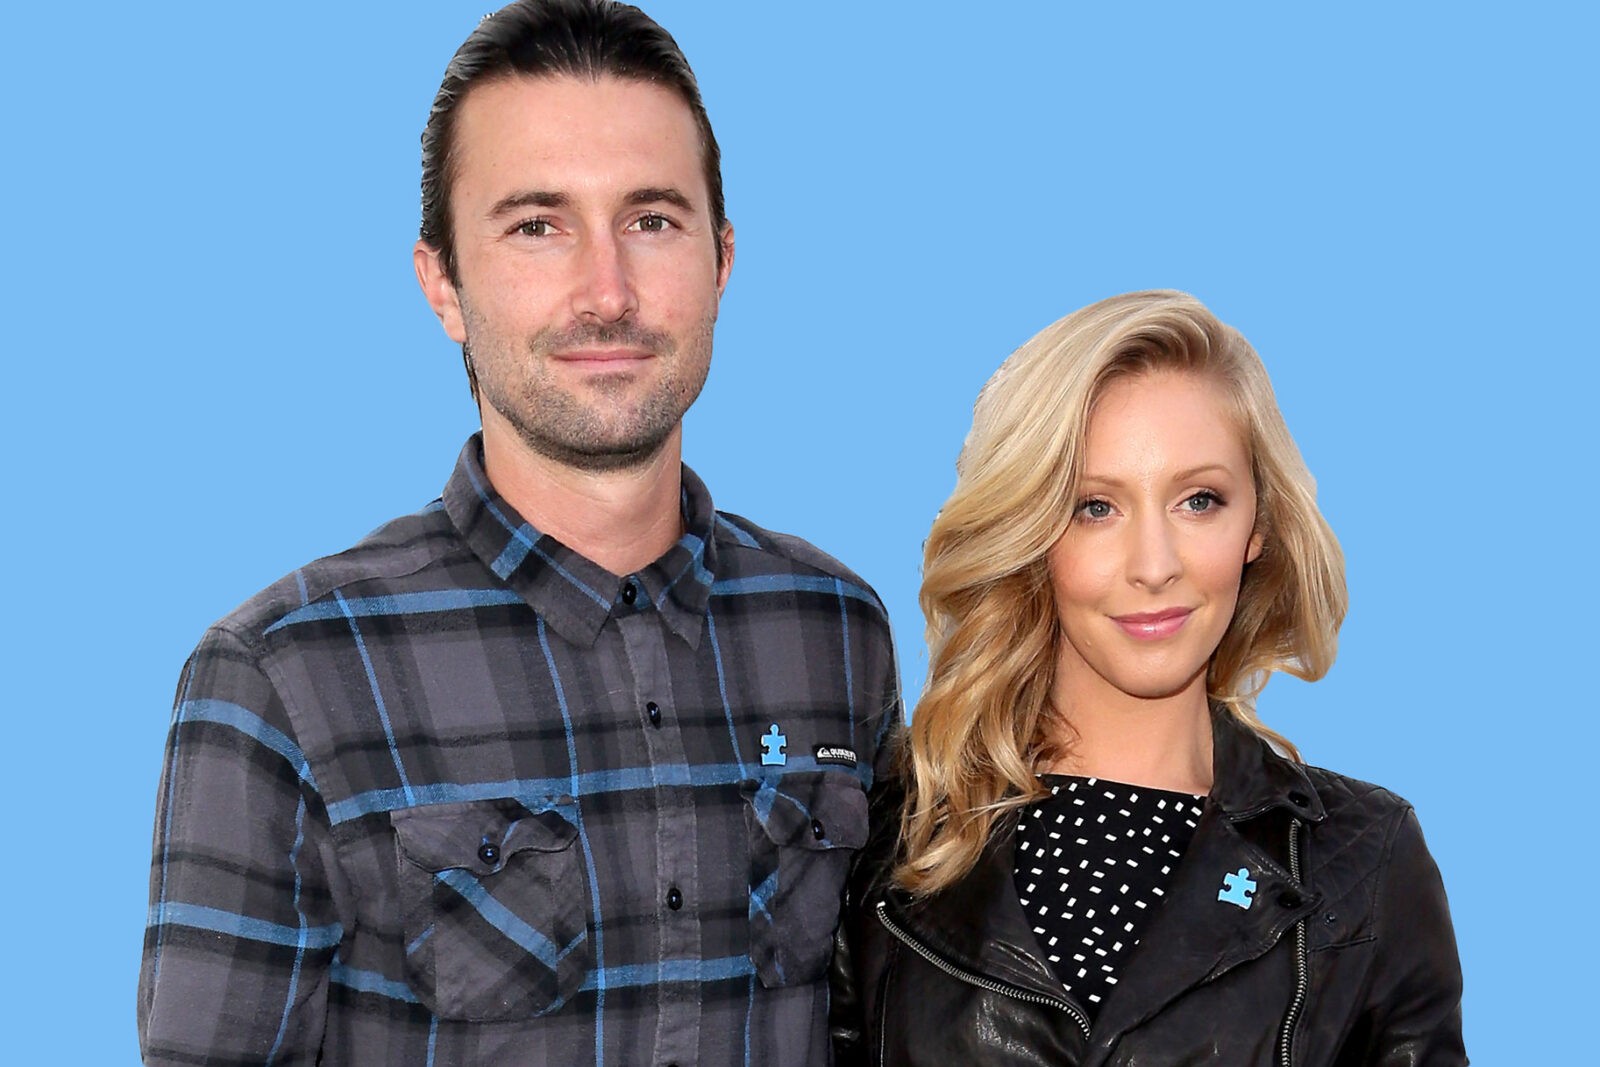 Why Did Brandon and Leah Divorce